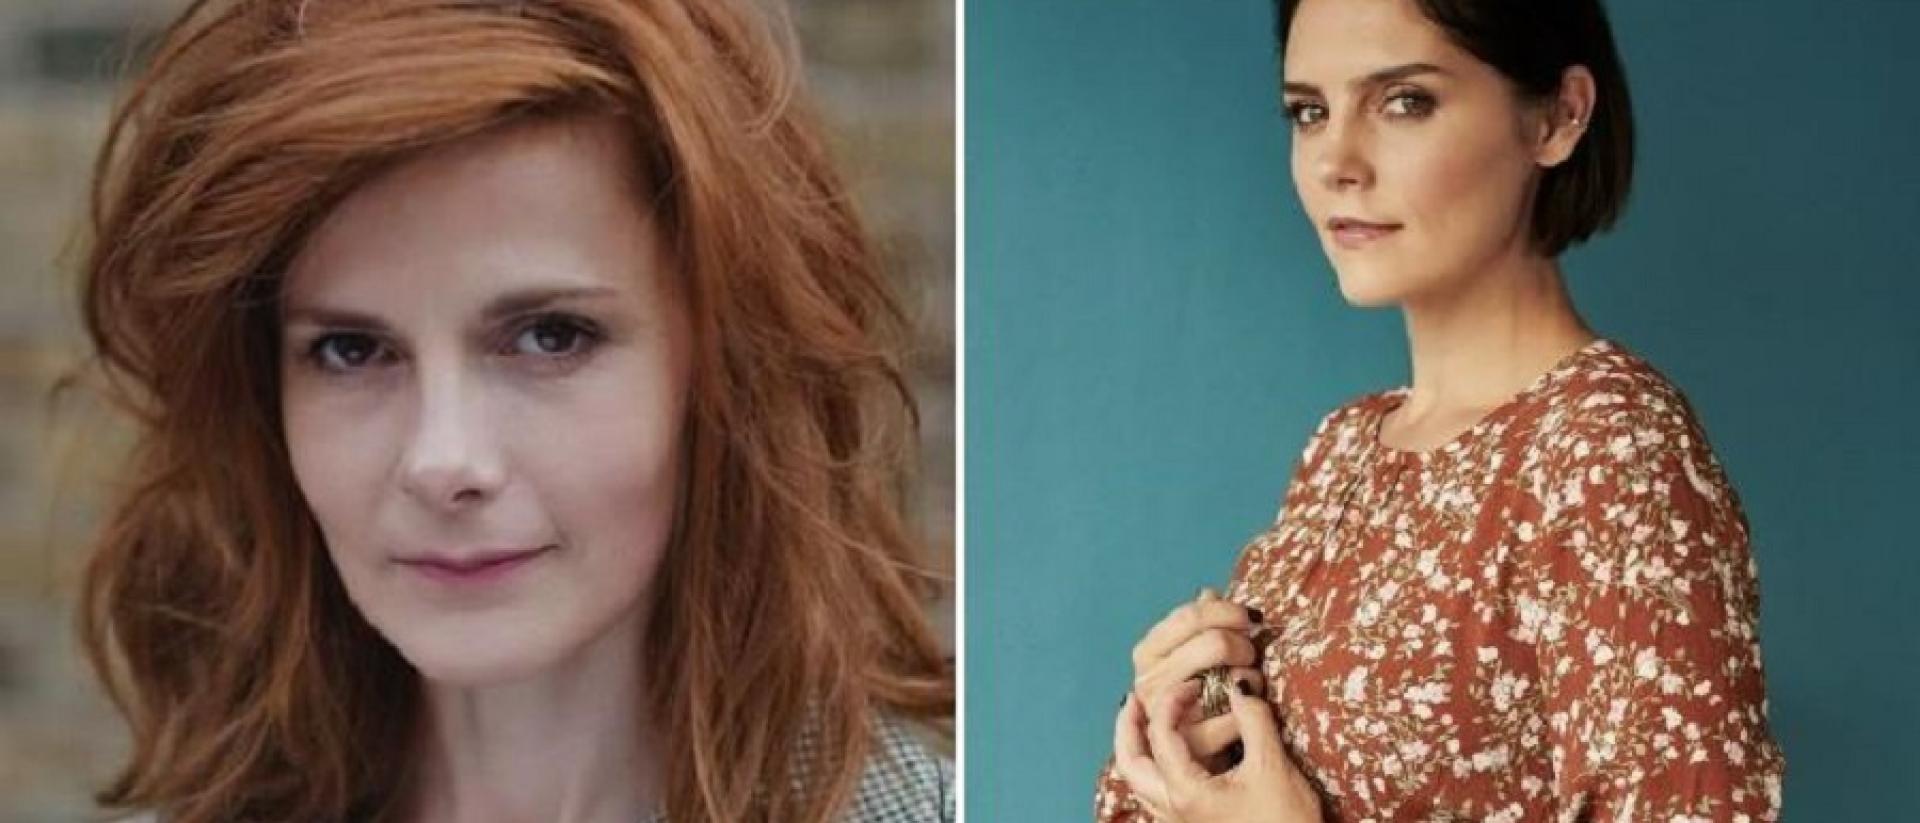 Portrait photos of Louise Brealey and Annabel Scholey